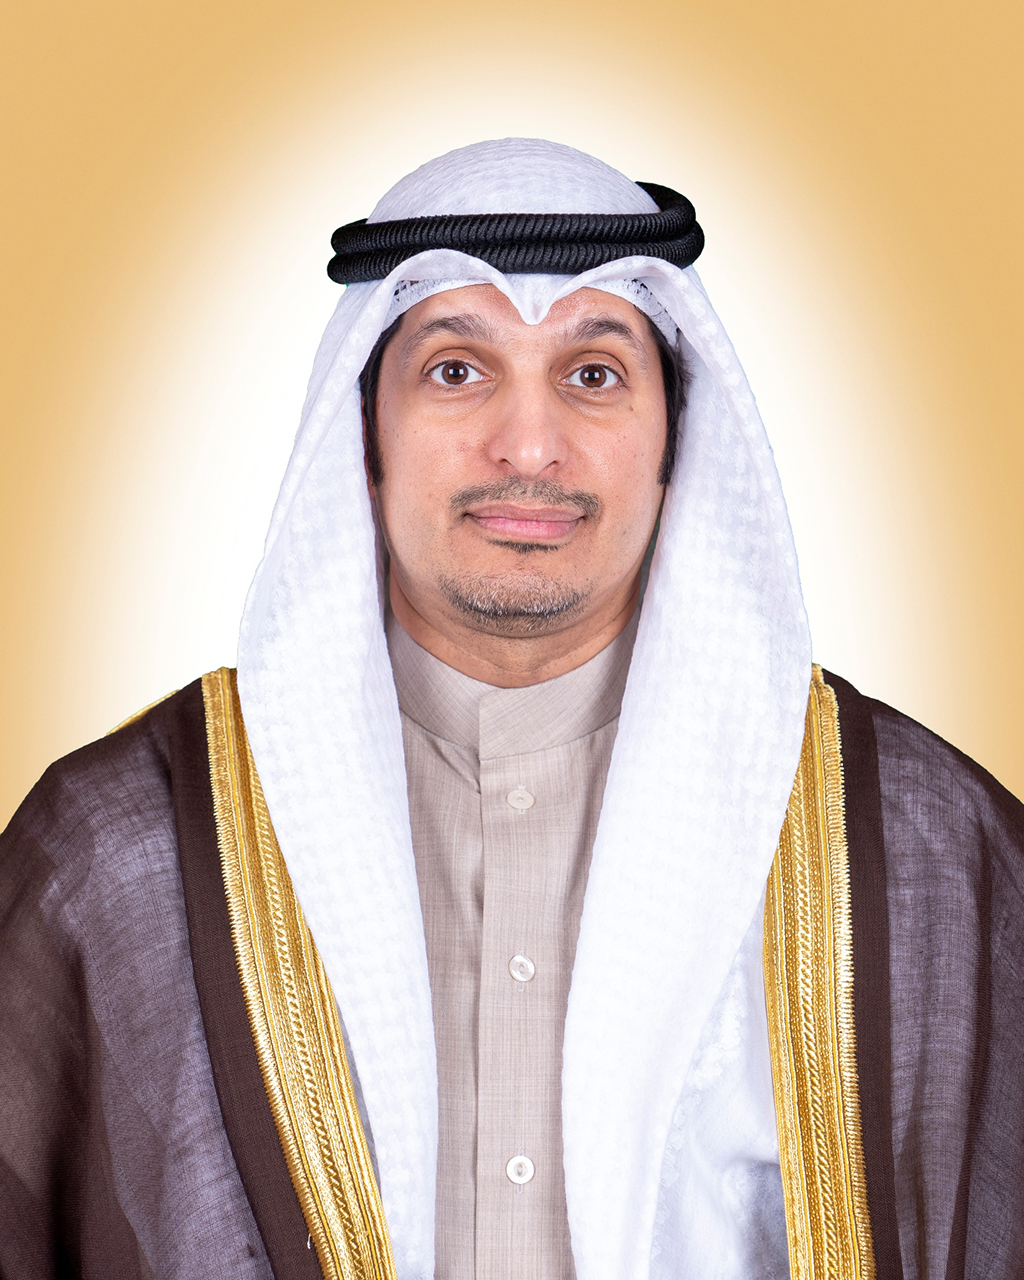 Abdulrahman Al-Mutairi, Minister of Information and Minister of State for Youth Affairs.